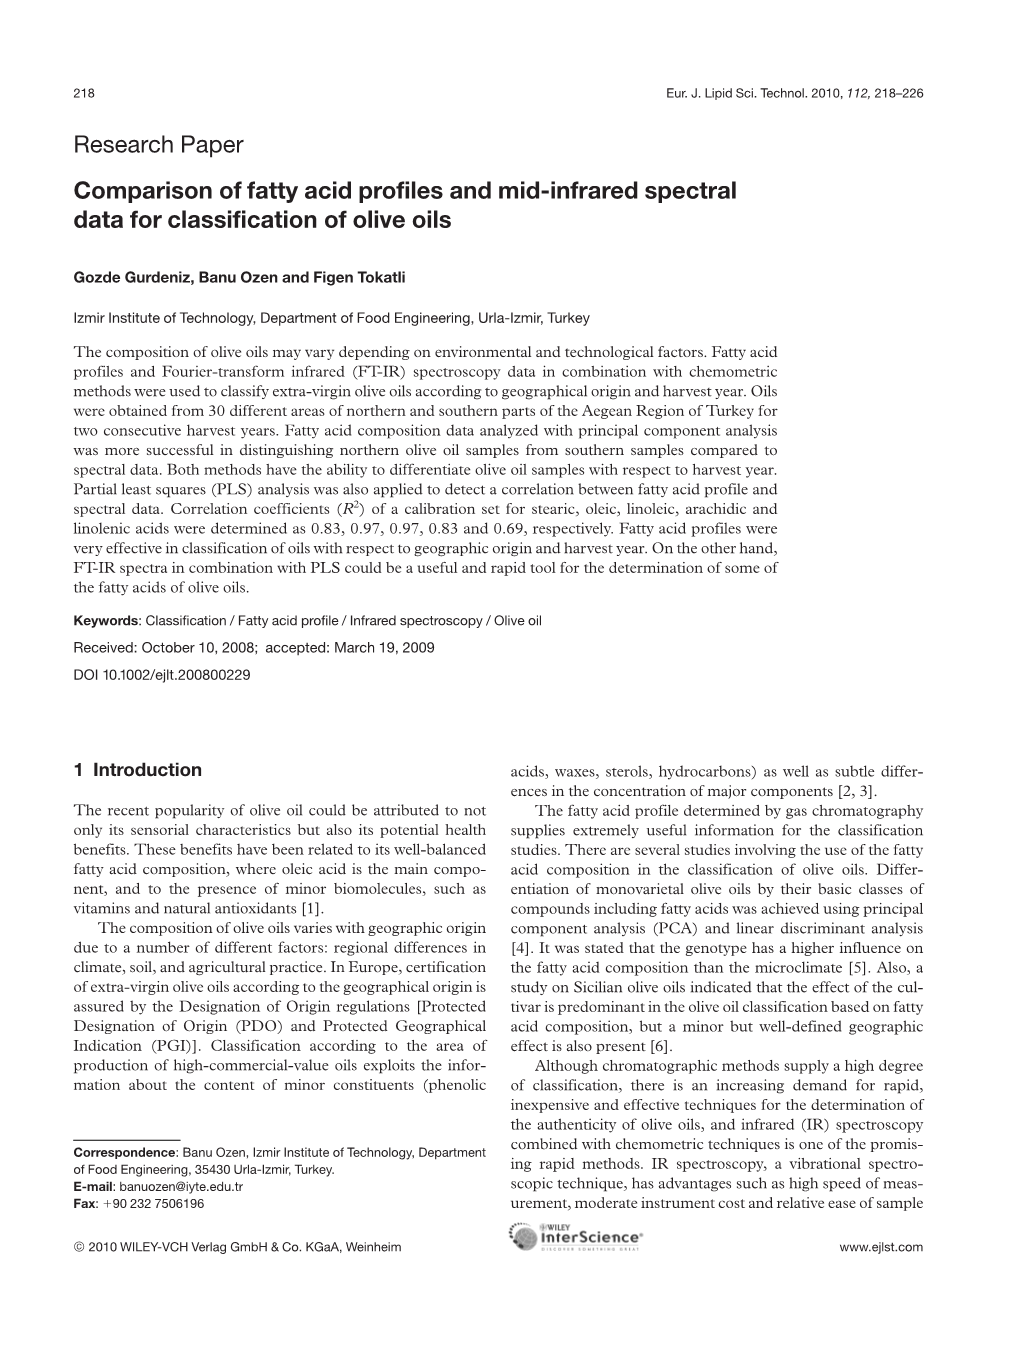 Comparison of Fatty Acid Profiles and Mid-Infrared Spectral Data for Classification of Olive Oils